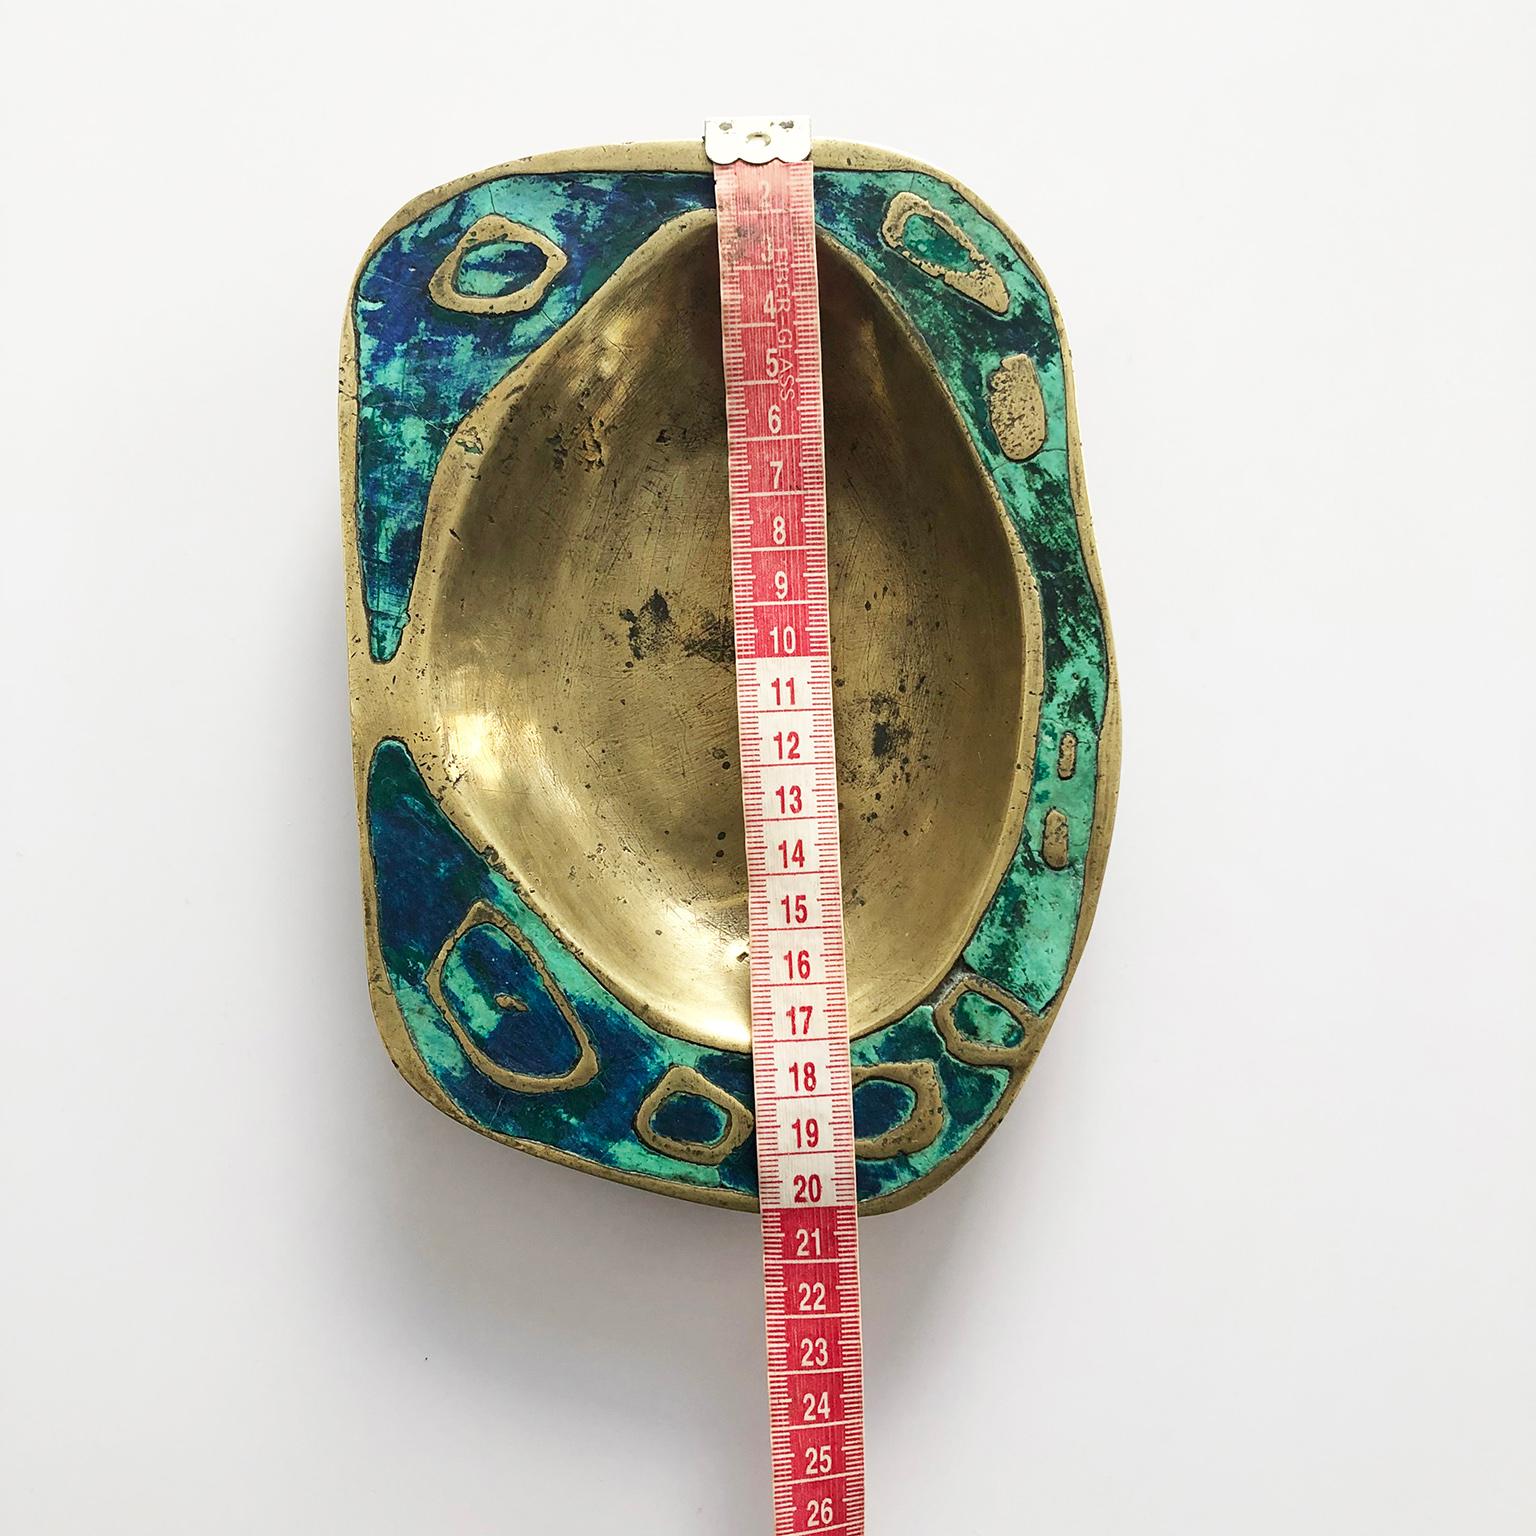 Dated 1958, we offer this ashtrays designed by Pepe Mendoza.

Designer, Pepe Mendoza ran a foundry in Mexico that produced a limited number of furniture pieces and decorative objects in the late 1950s and 1960s. His work is characterized by a